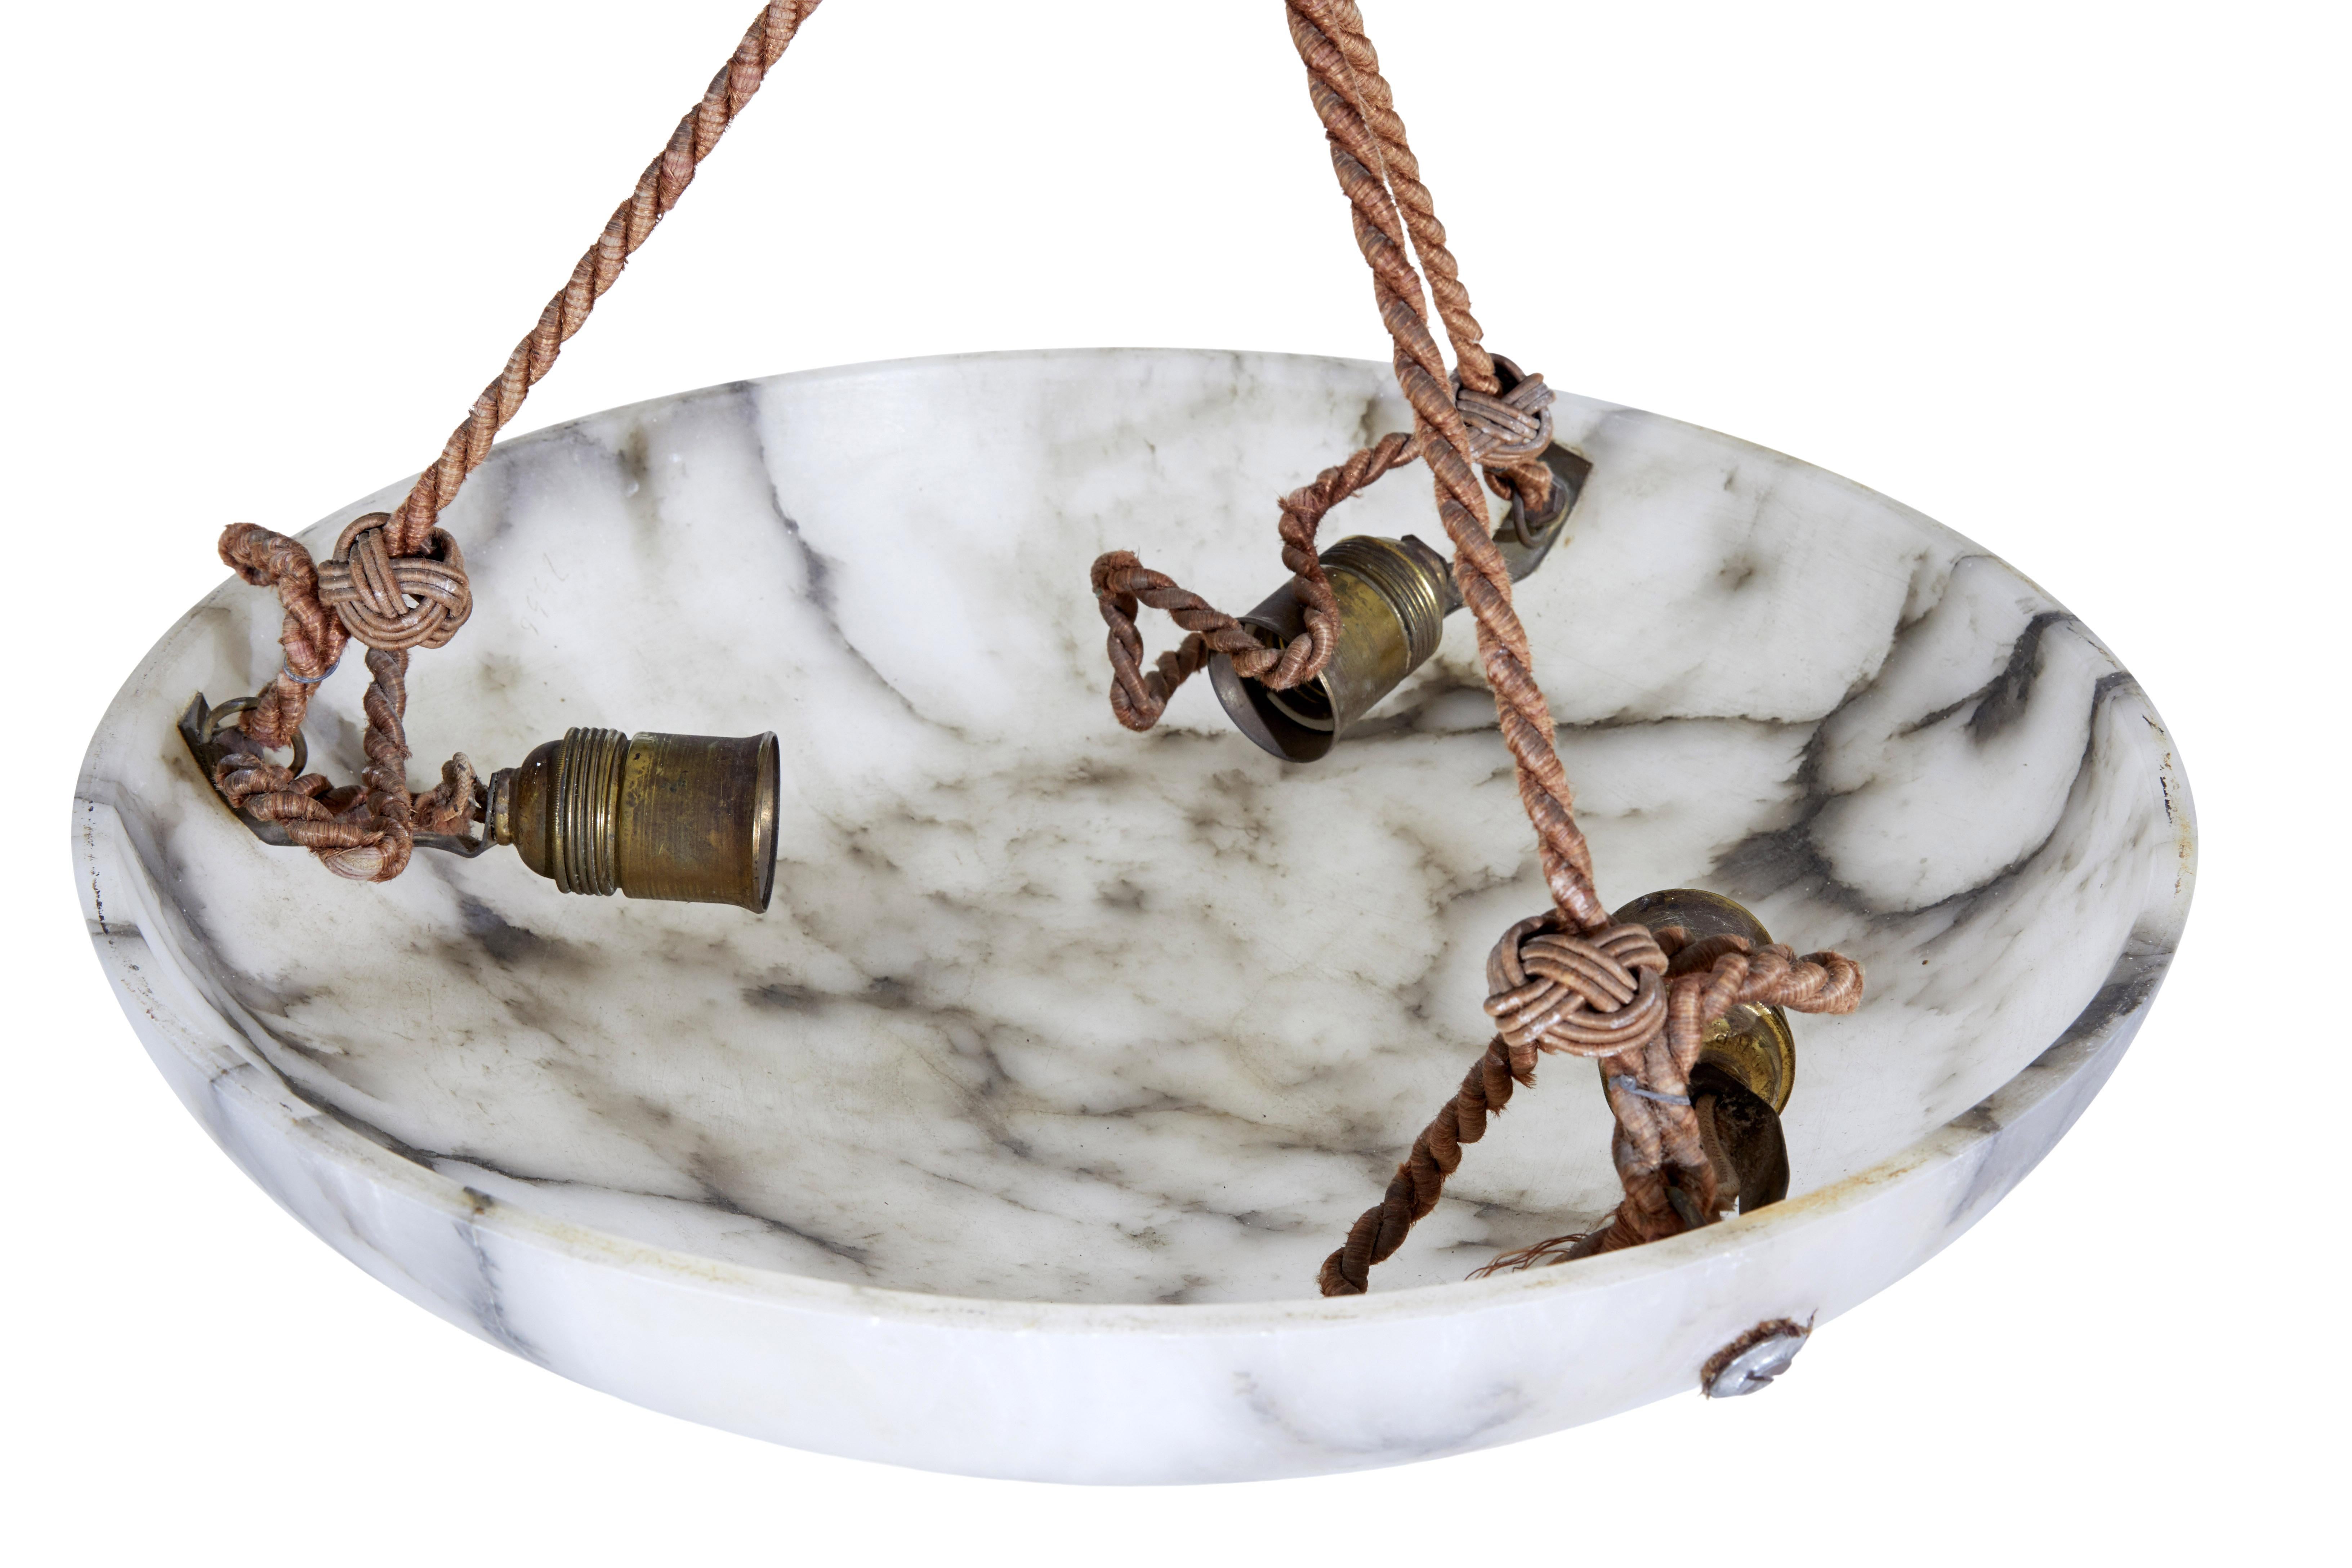 Alabaster art deco ceiling light circa 1920.

Good quality swedish alabaster dish light, made from warm whites/greys with darker grey veining.  Light is suspended by 3 ropes that lead up to a latice strung ceiling rose.

The light is fitted with